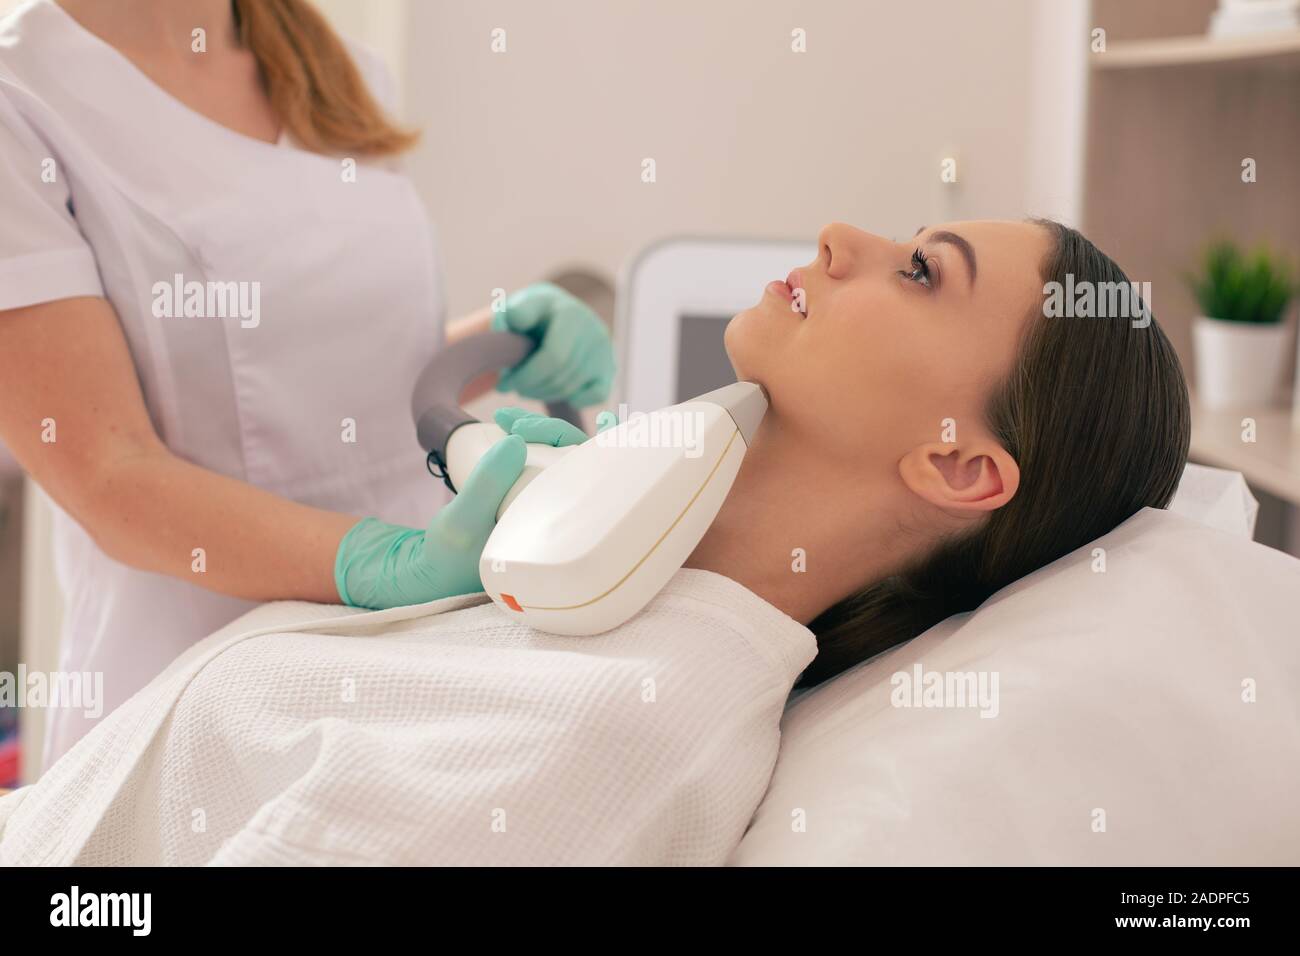 Confident woman undergoing new laser hair removal procedure Stock Photo